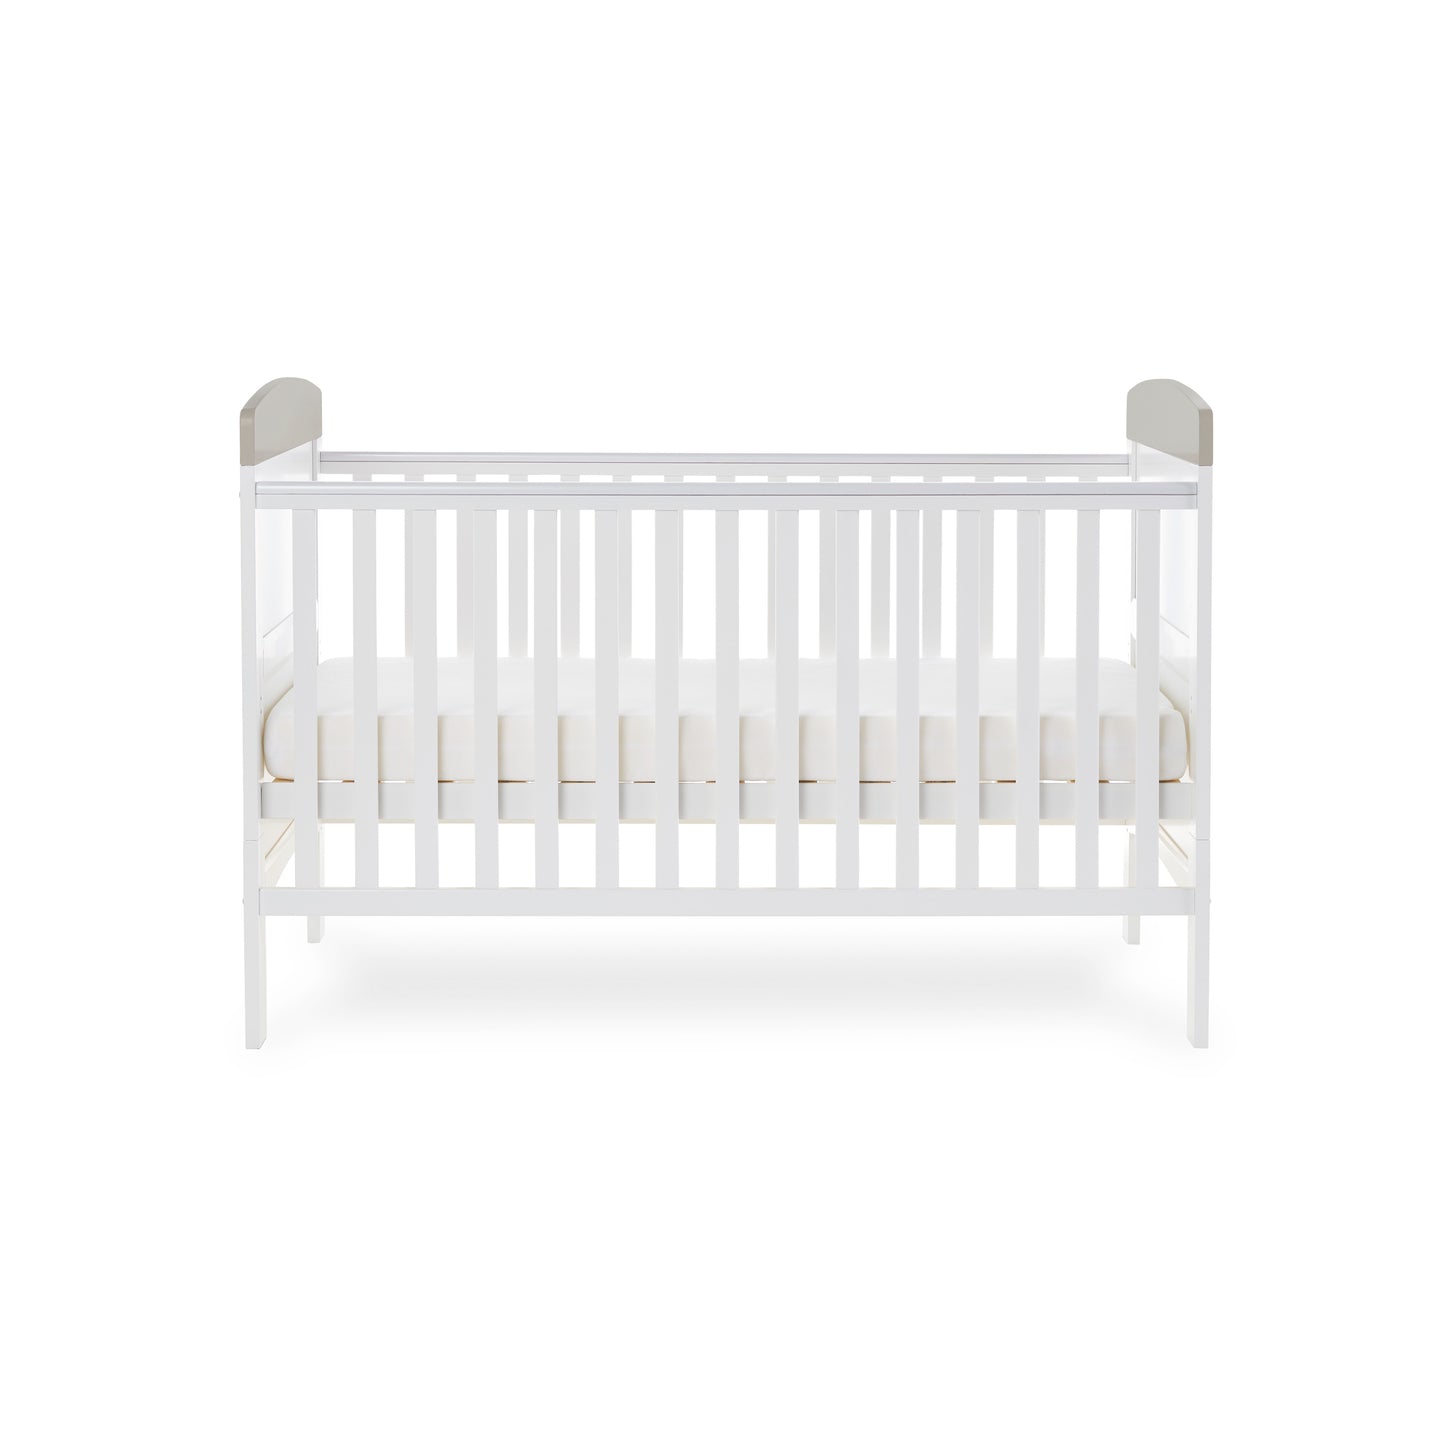 Obaby Grace Inspire Cot Bed - Me & Mini Me Elephants Pink & Grey - Land of Little